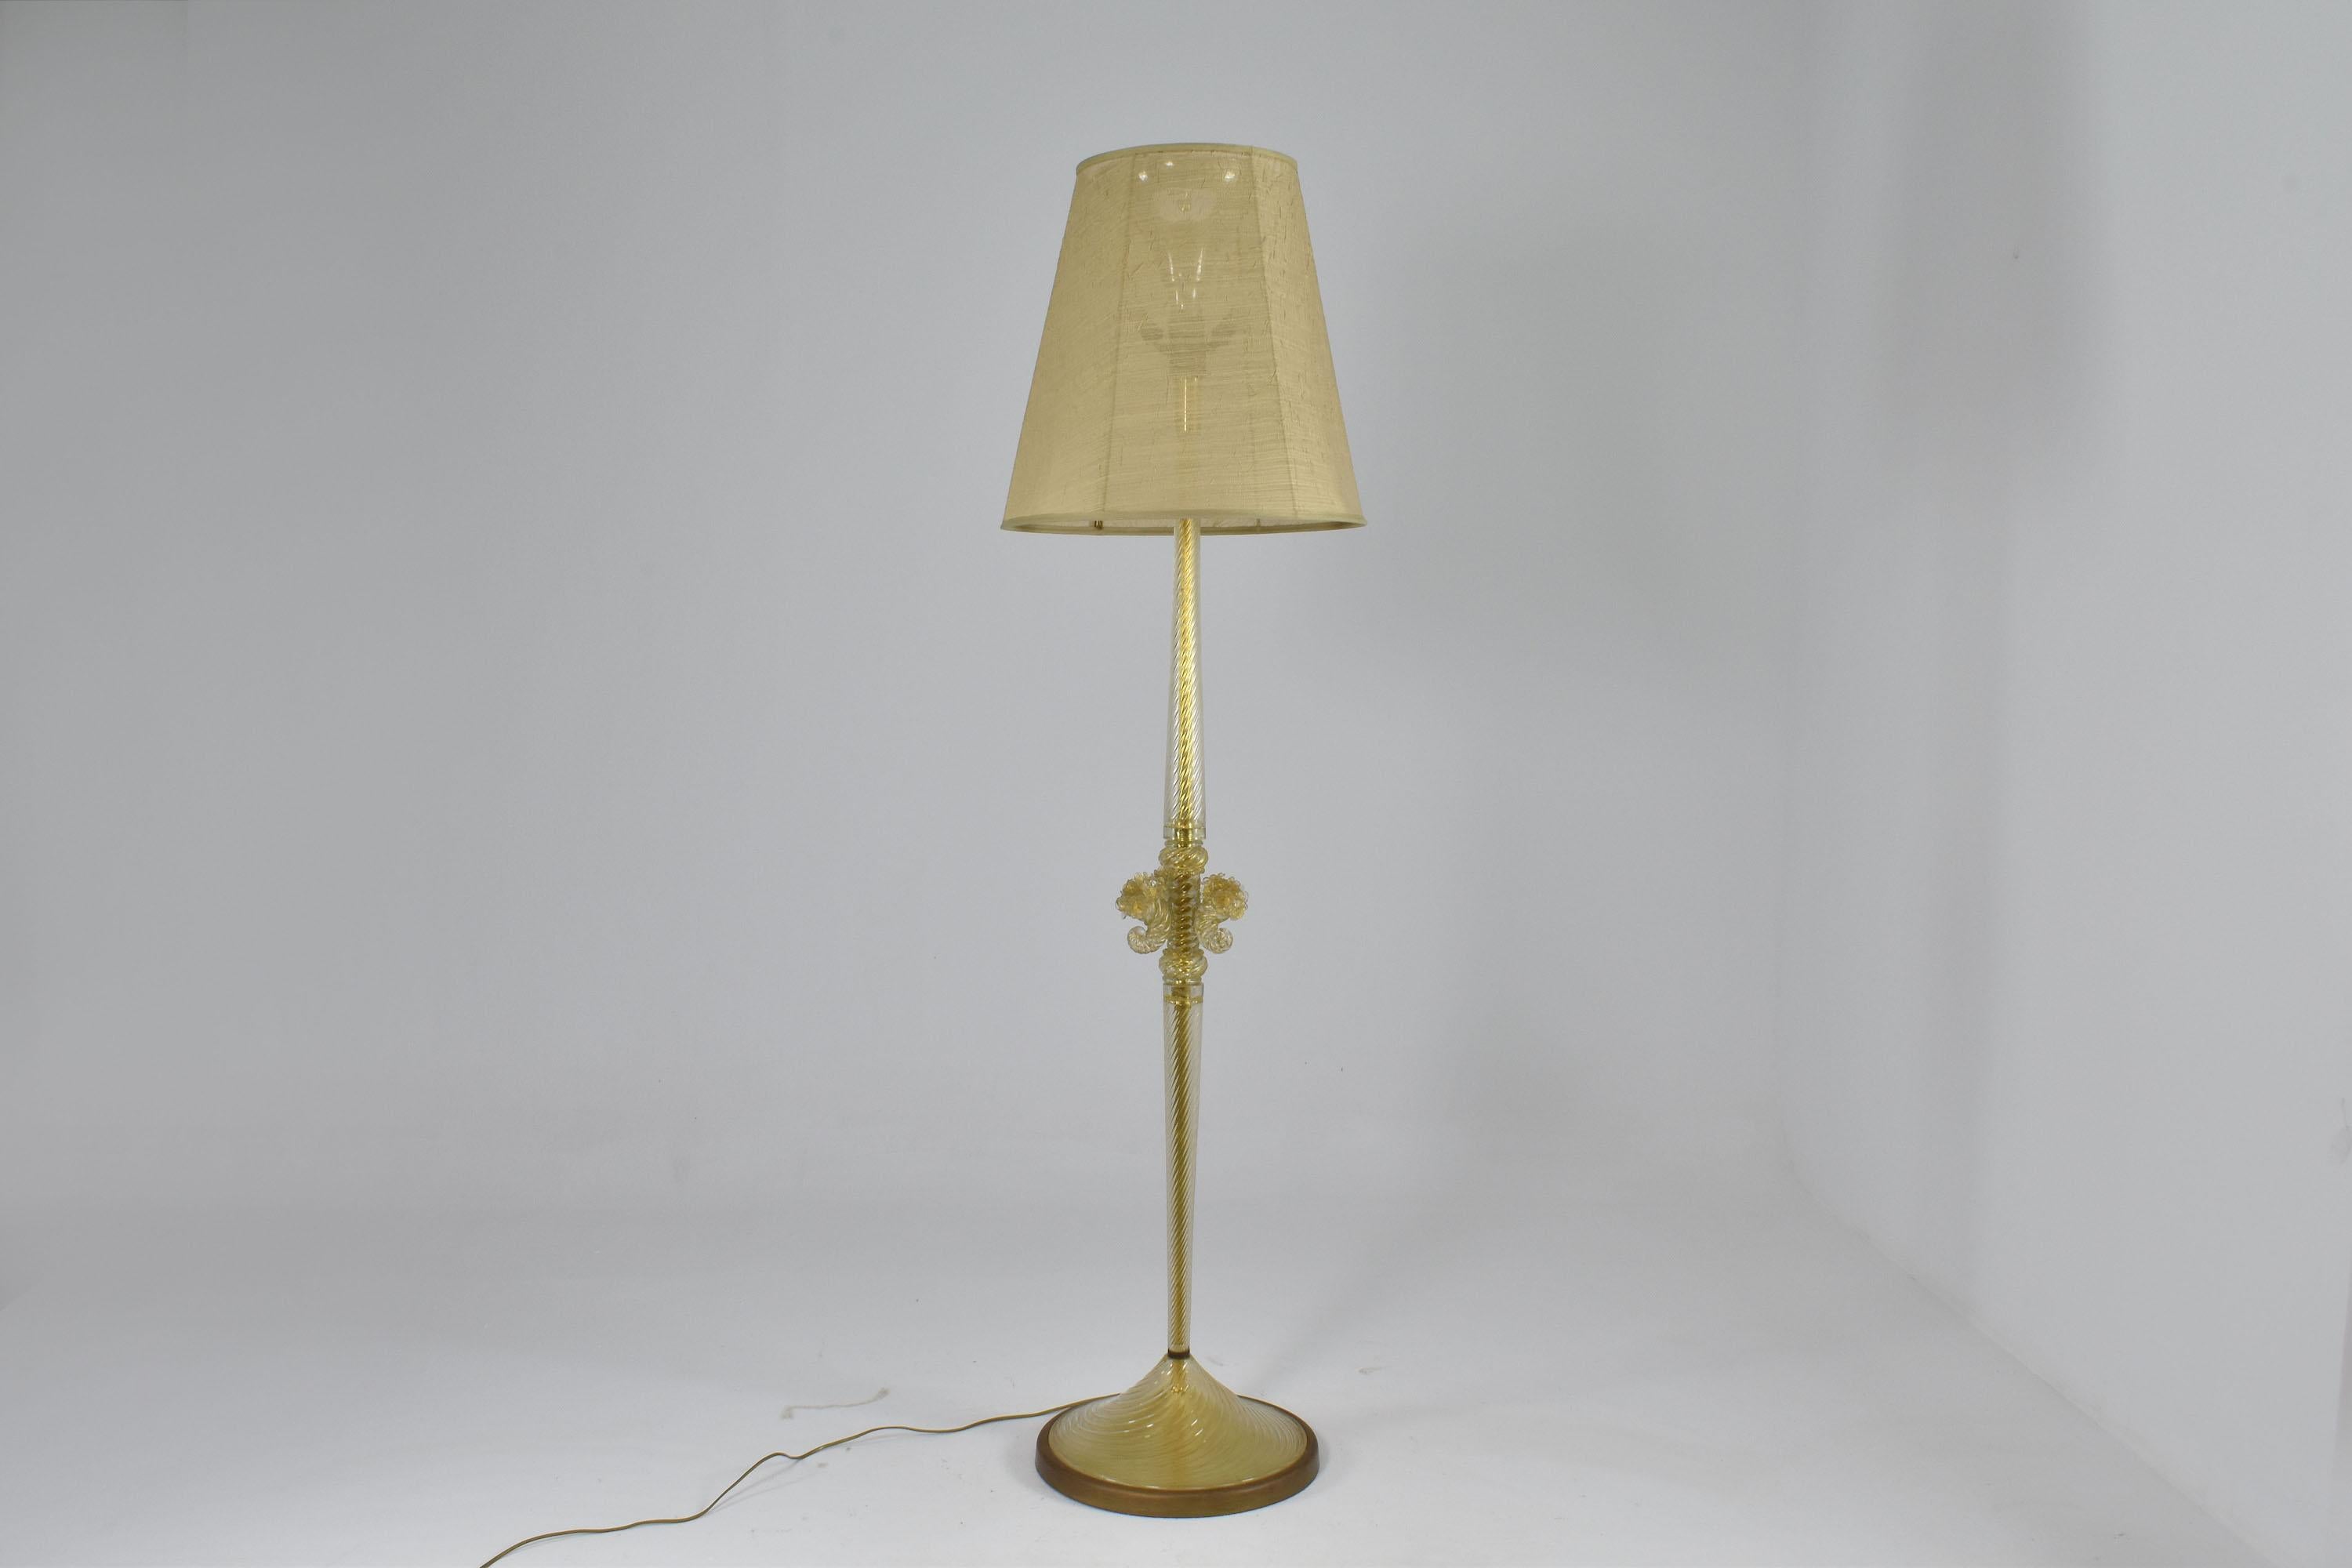 An exquisite Italian mid-century modern Murano floor lamp, circa 1950s in beautiful condition with a structure in Barovier Toso's staple gold-infused Murano glass structure. 
Barovier Toso, renowned for their mastery in glassmaking, has a rich